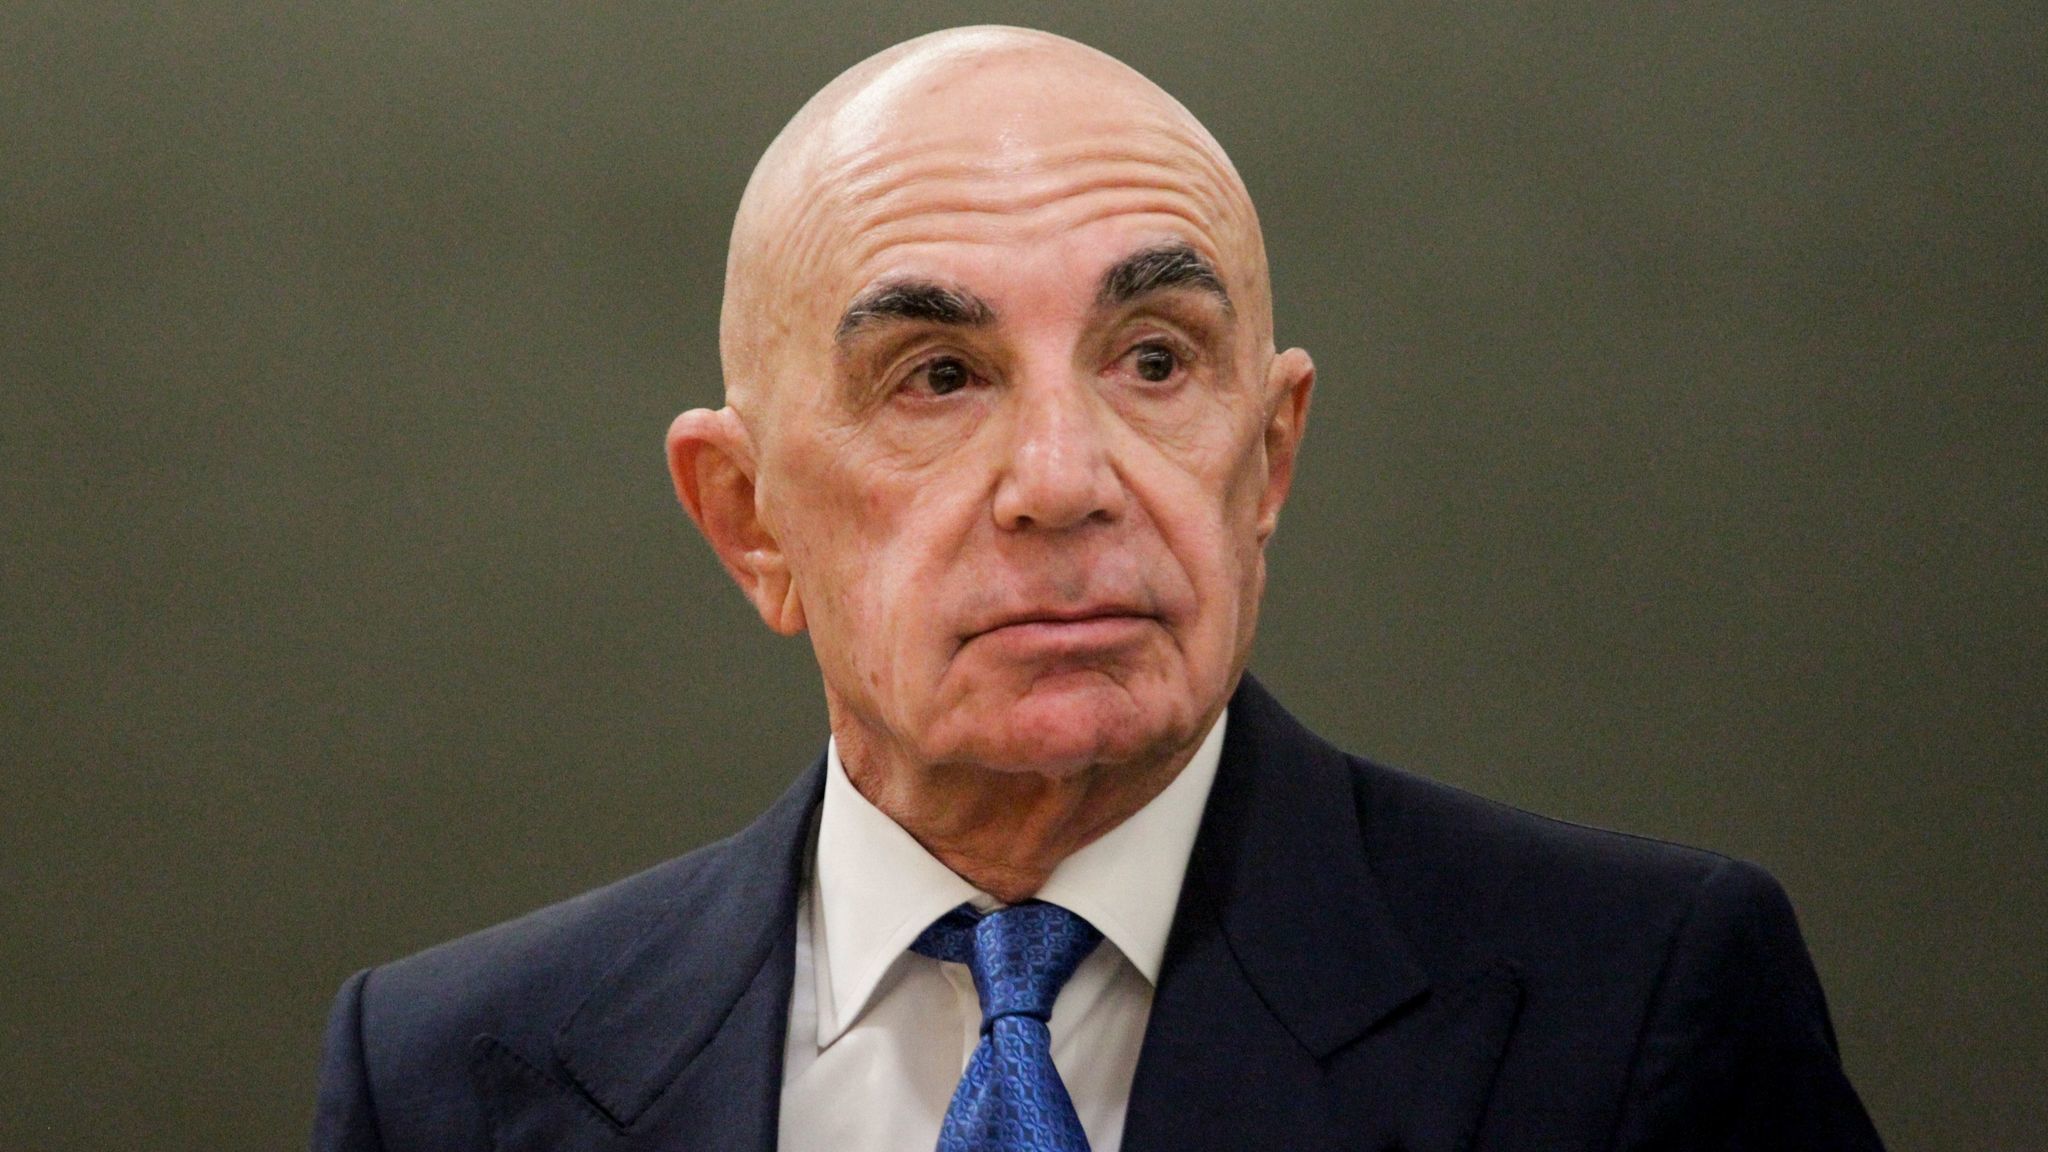 Attorney Robert Shapiro, who is representing developer Mohamed Hadid, at a hearing at the Van Nuys Courthouse this month.